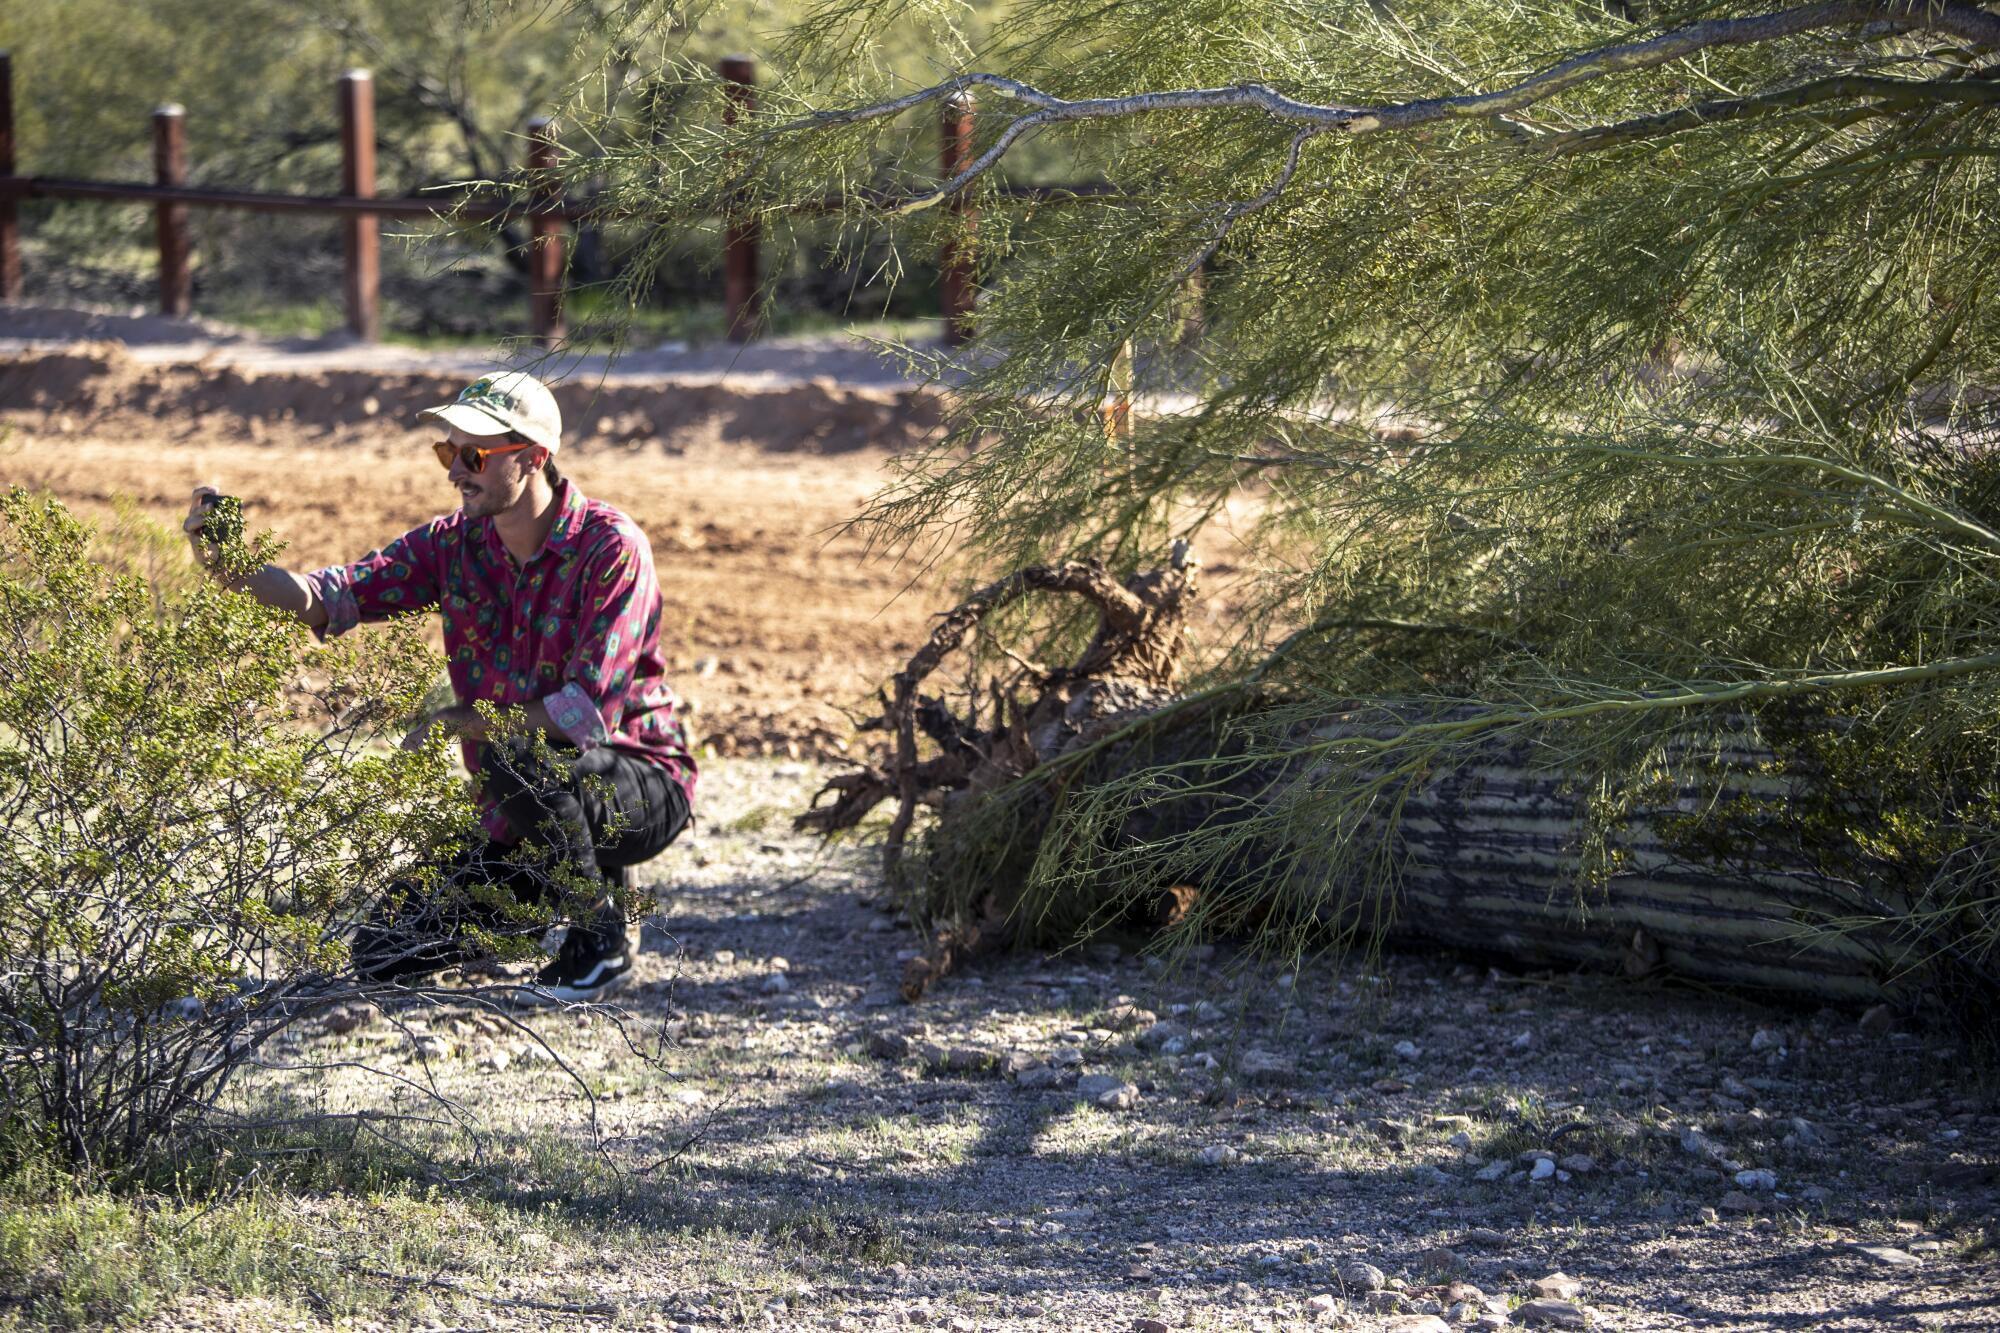 Former park ranger Laiken Jordhal documents a saguaro cactus on the ground after it was uprooted by and covered up by construction crews making way for new border wall in Organ Pipe Cactus National Monument in Arizona. 